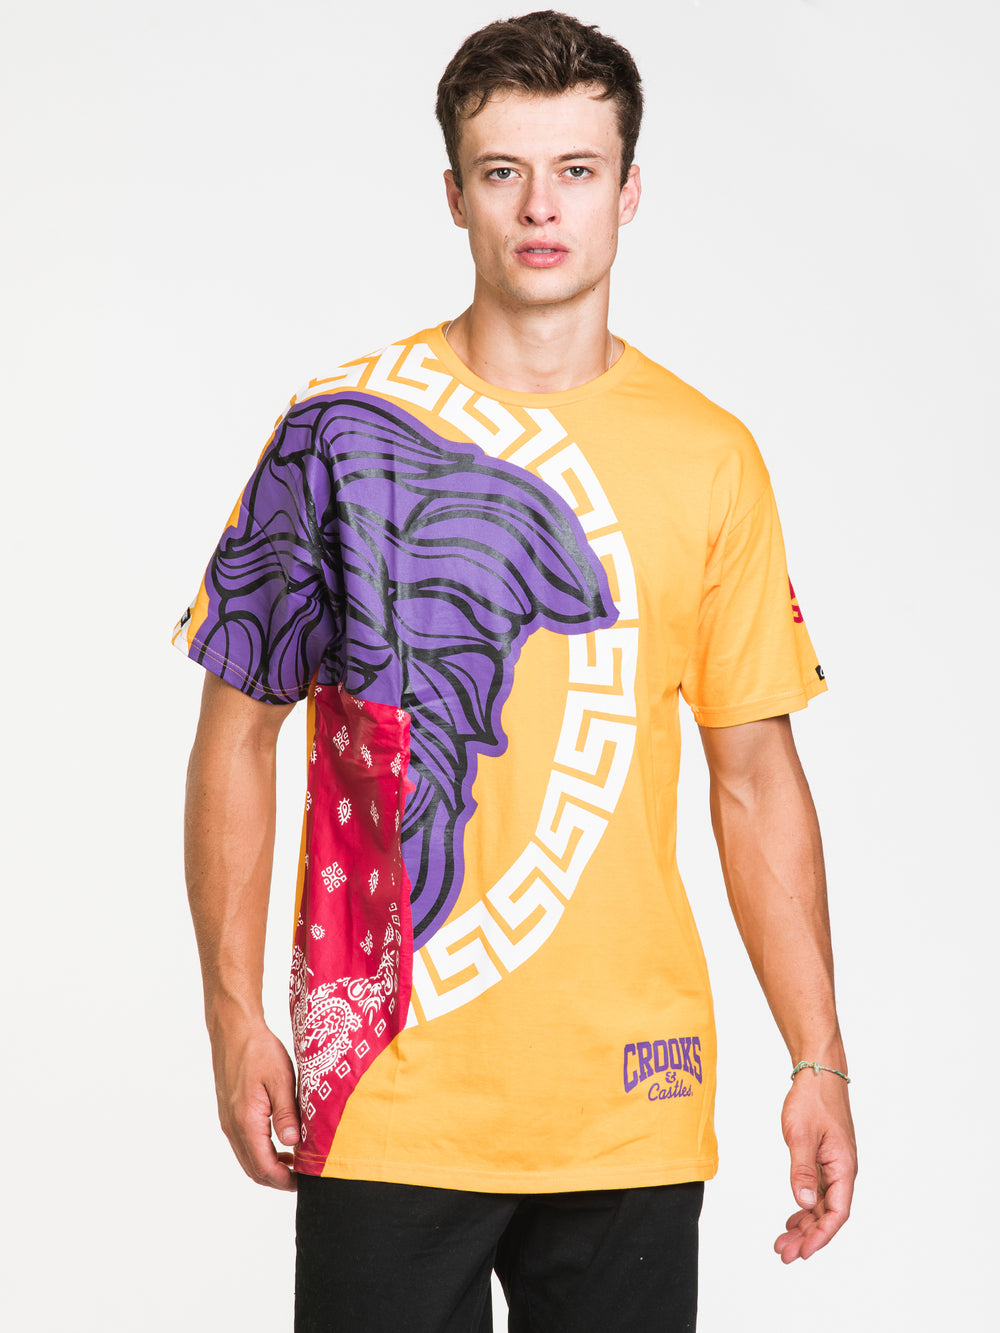 CROOKS & CASTLES GRECO BANDITO OVER SIZED T-SHIRT - DÉSTOCKAGE